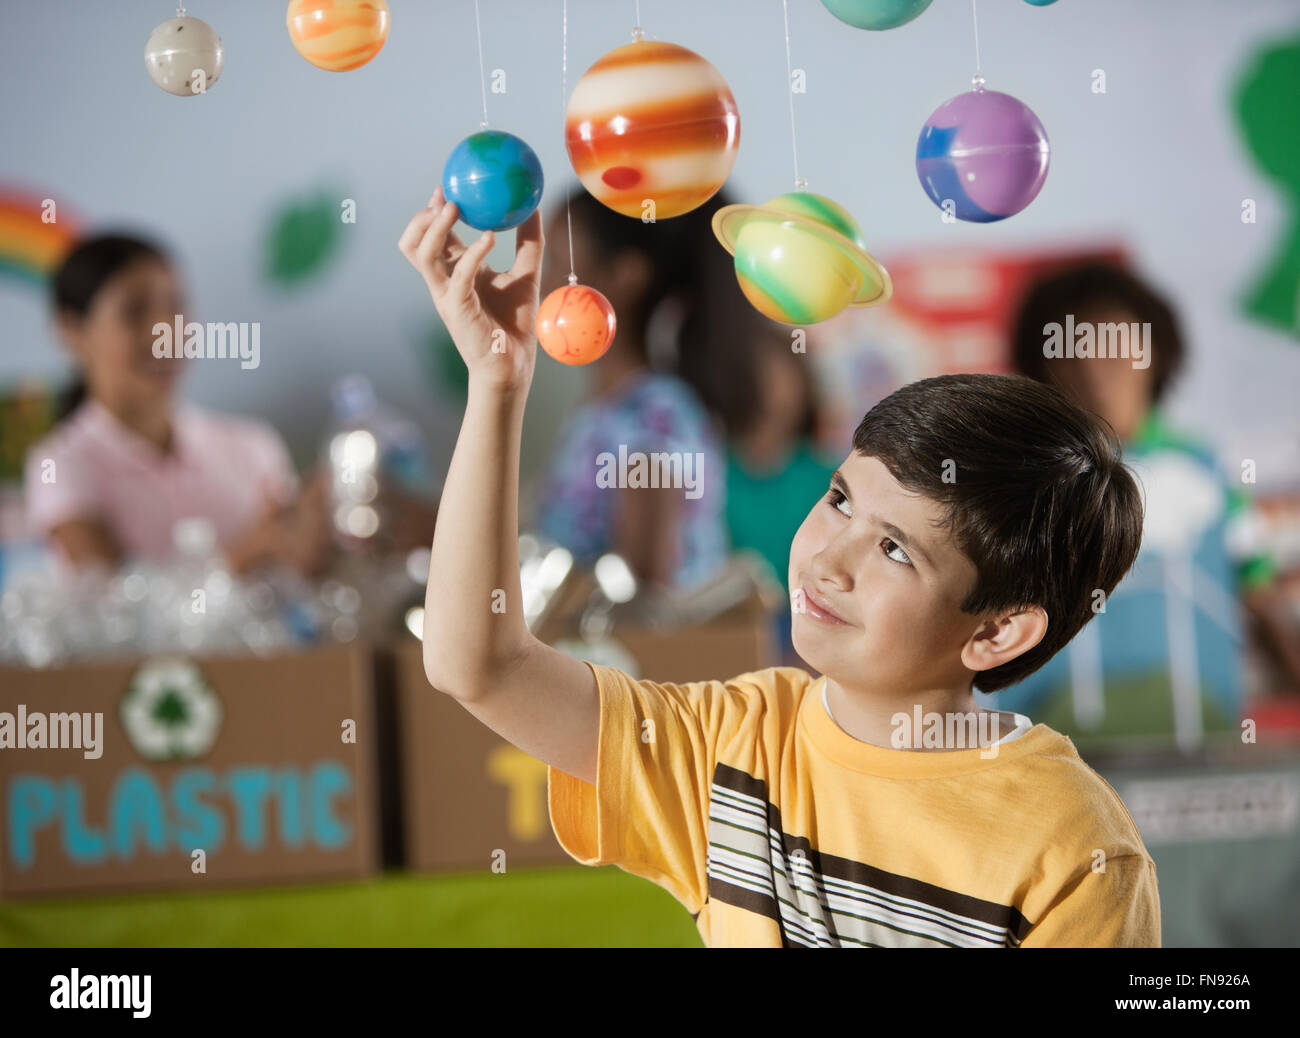 A boy looking up at a display of the planets, a presentation of the planetary system. Stock Photo